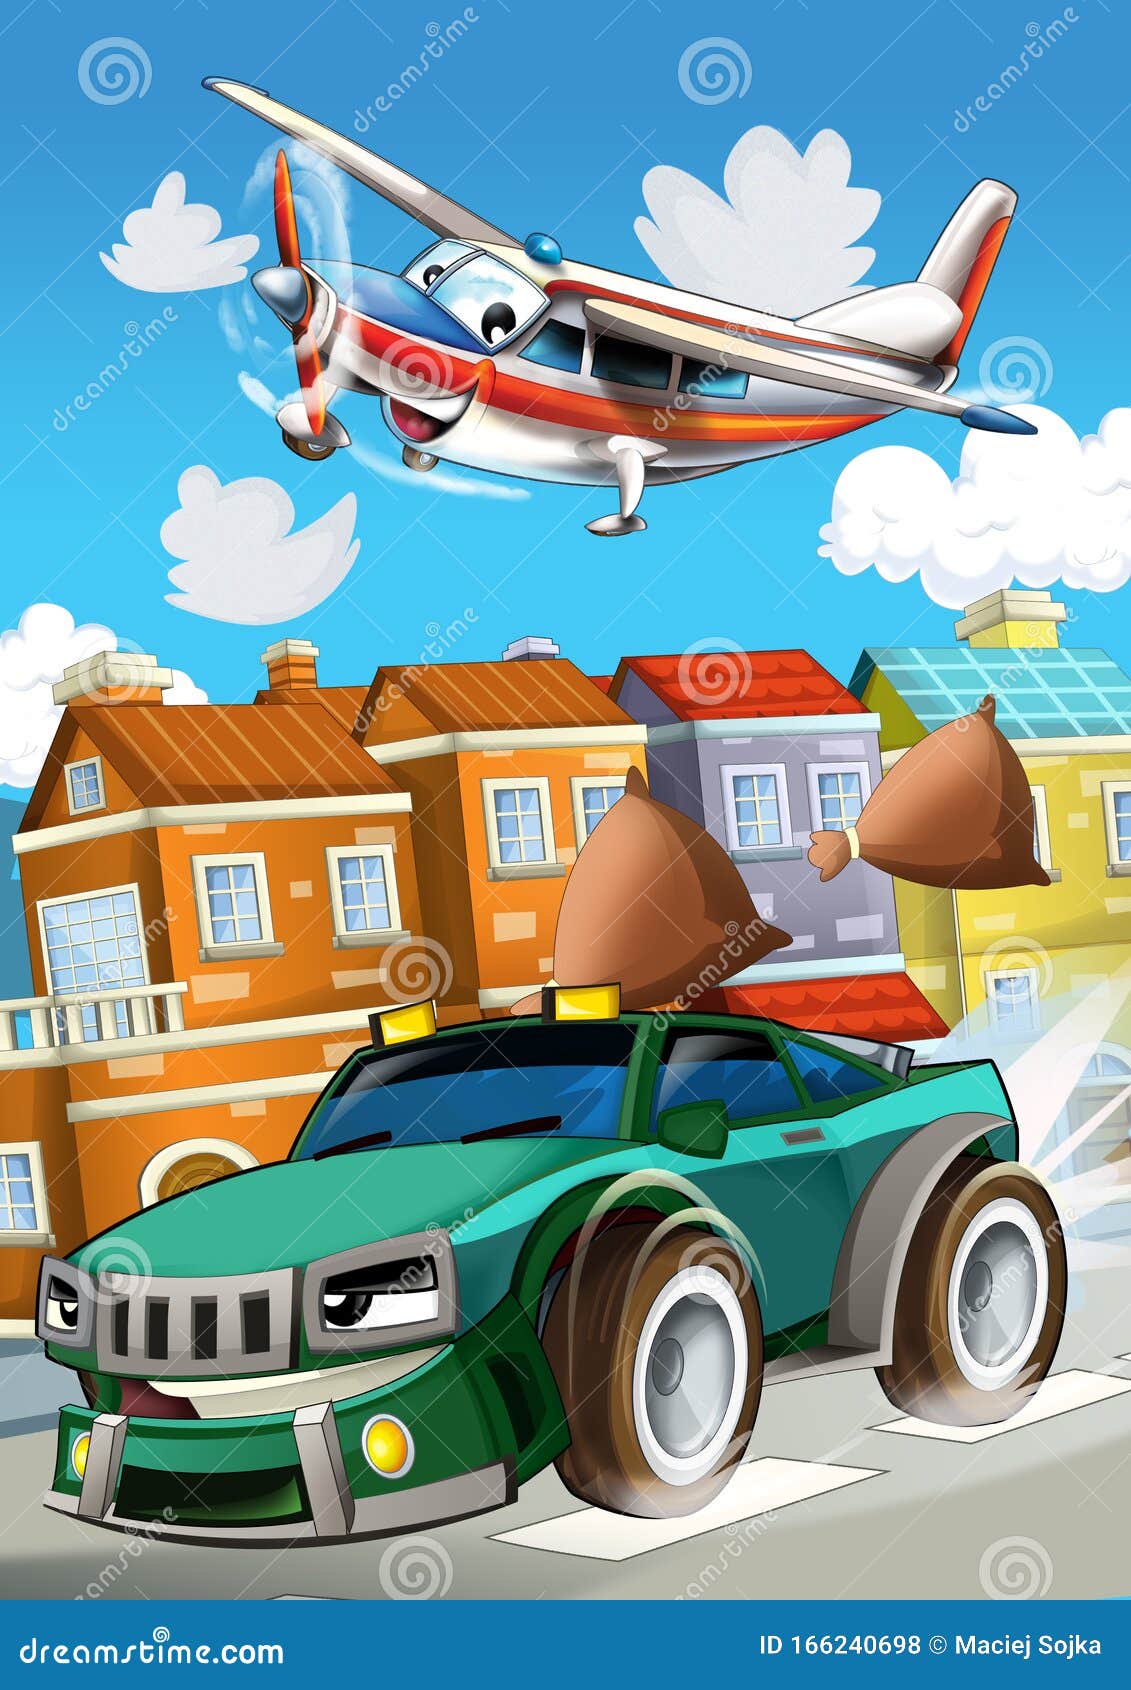 Happy and Funny Cartoon Car Looking and Smiling Driving through the City  and Plane Flying - Illustration for Children Stock Illustration -  Illustration of amusement, background: 166240698